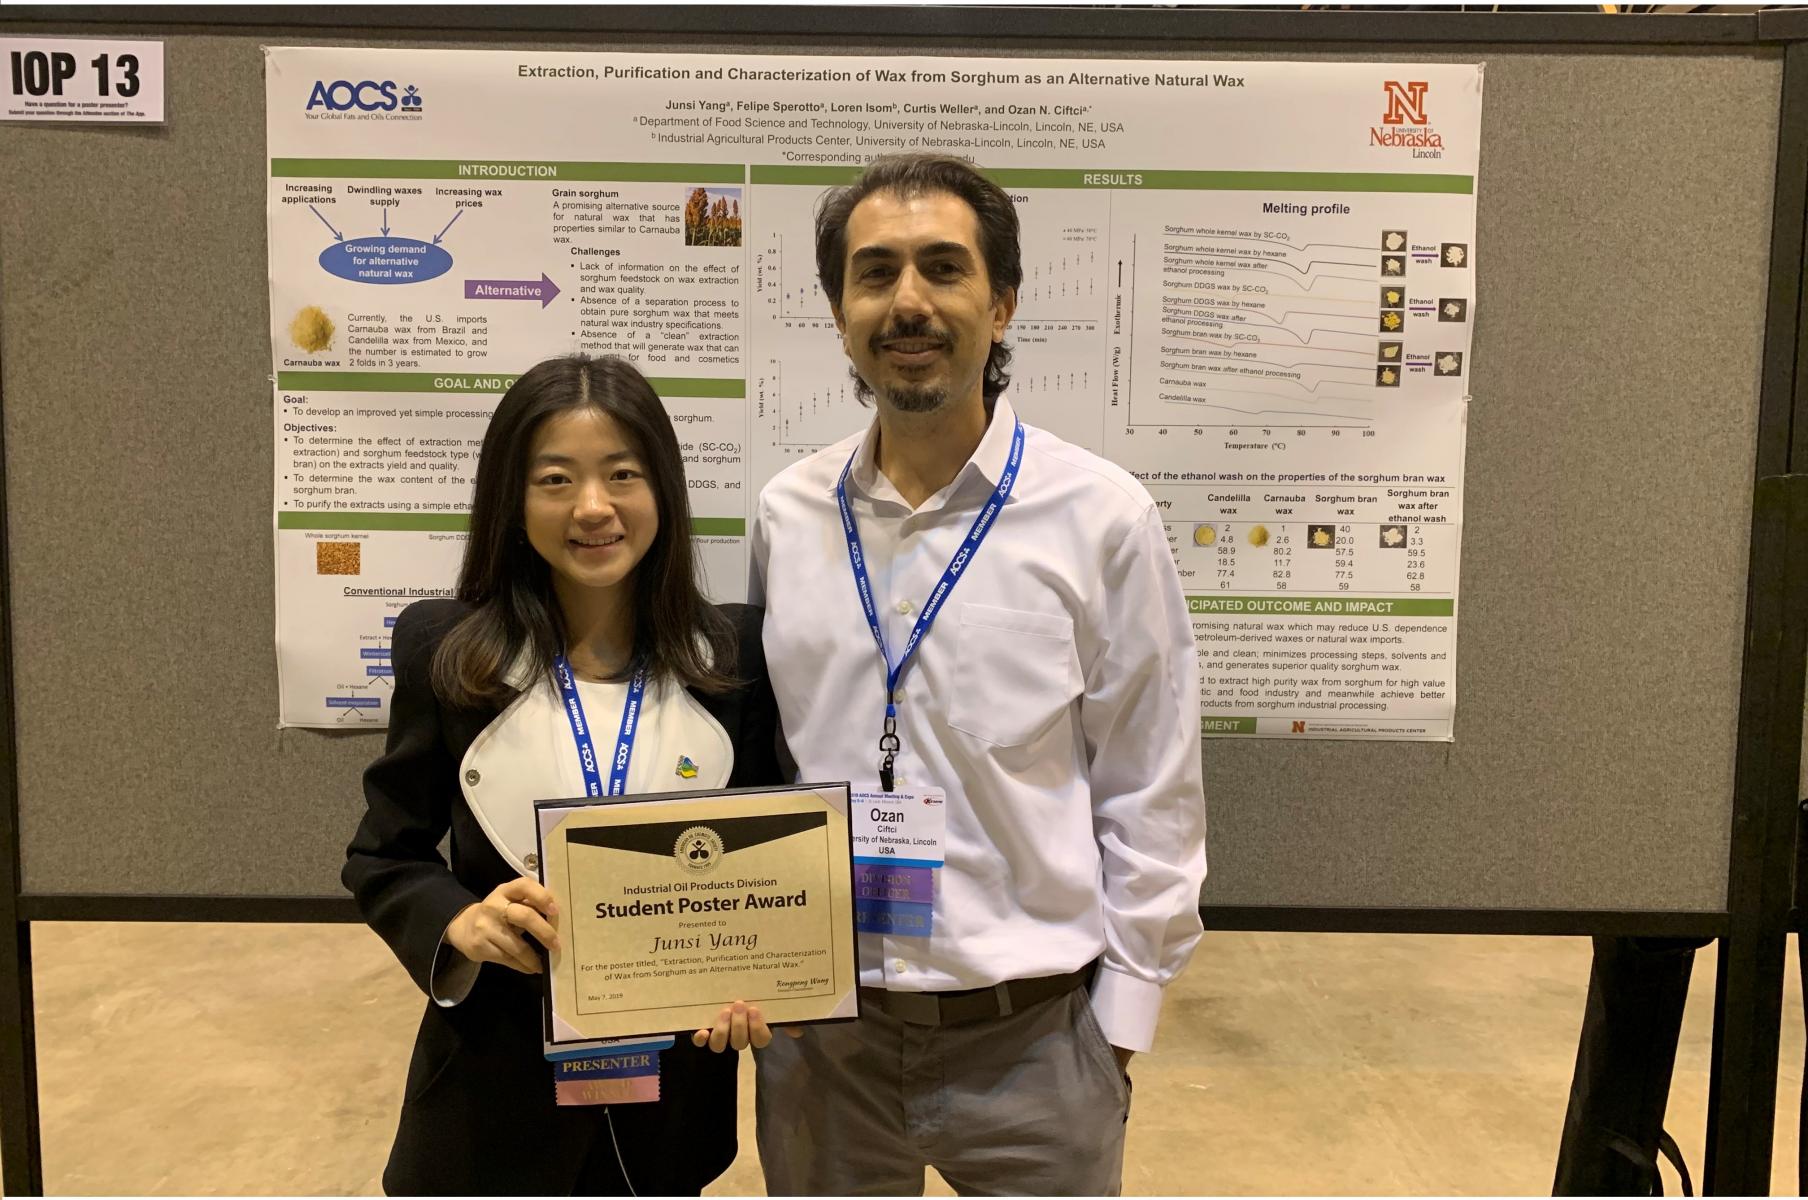 Jessica and Dr. Ciftci with her poster at the 2019 AOCS Annual Meeting and Expo in St. Louis, MO